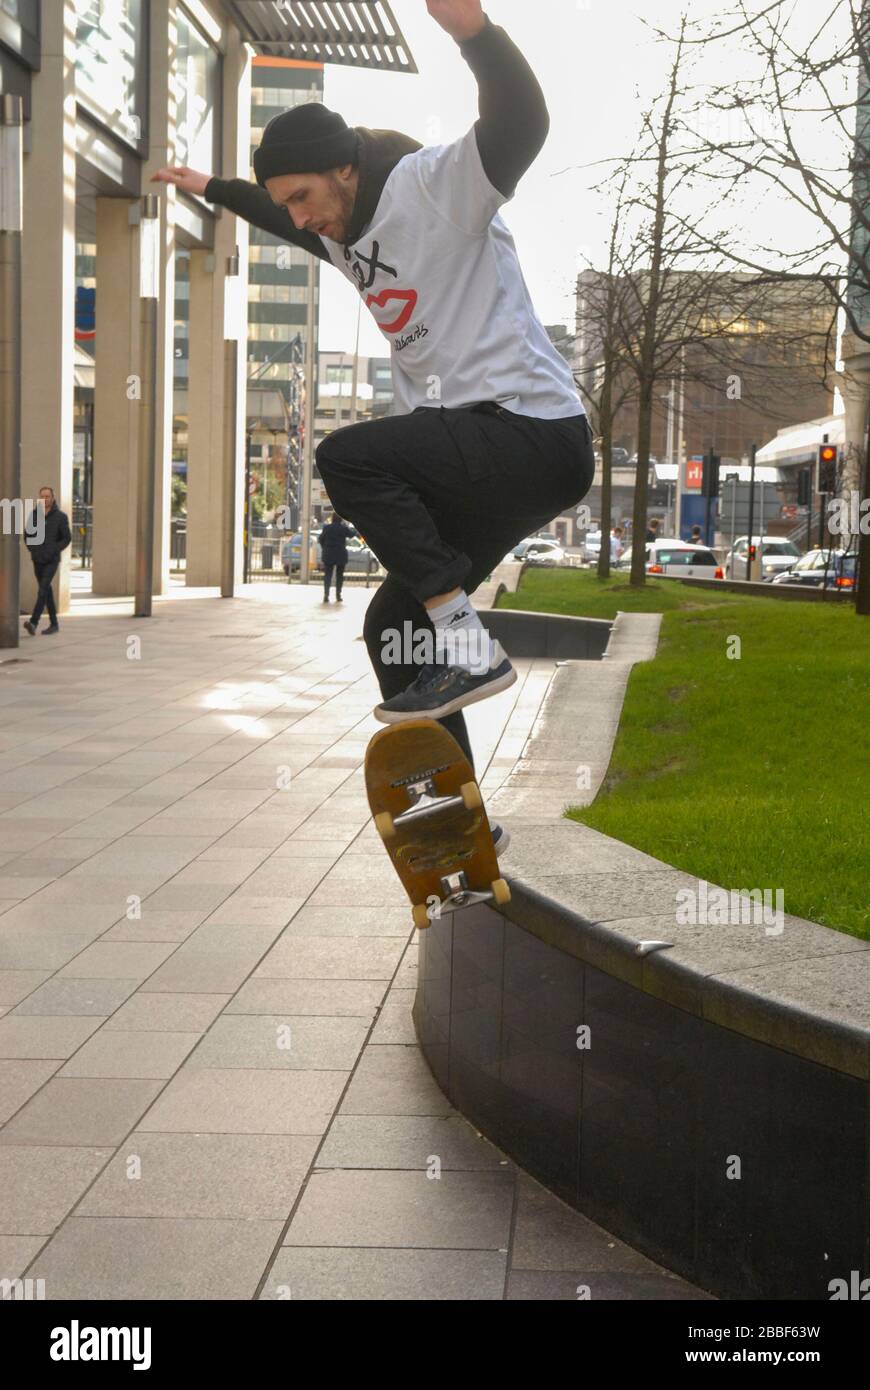 The health benefits of skateboarding Skateboarding has many health benefits,  these include - A persons overall fitness as it burns calories and hel  Stock Photo - Alamy